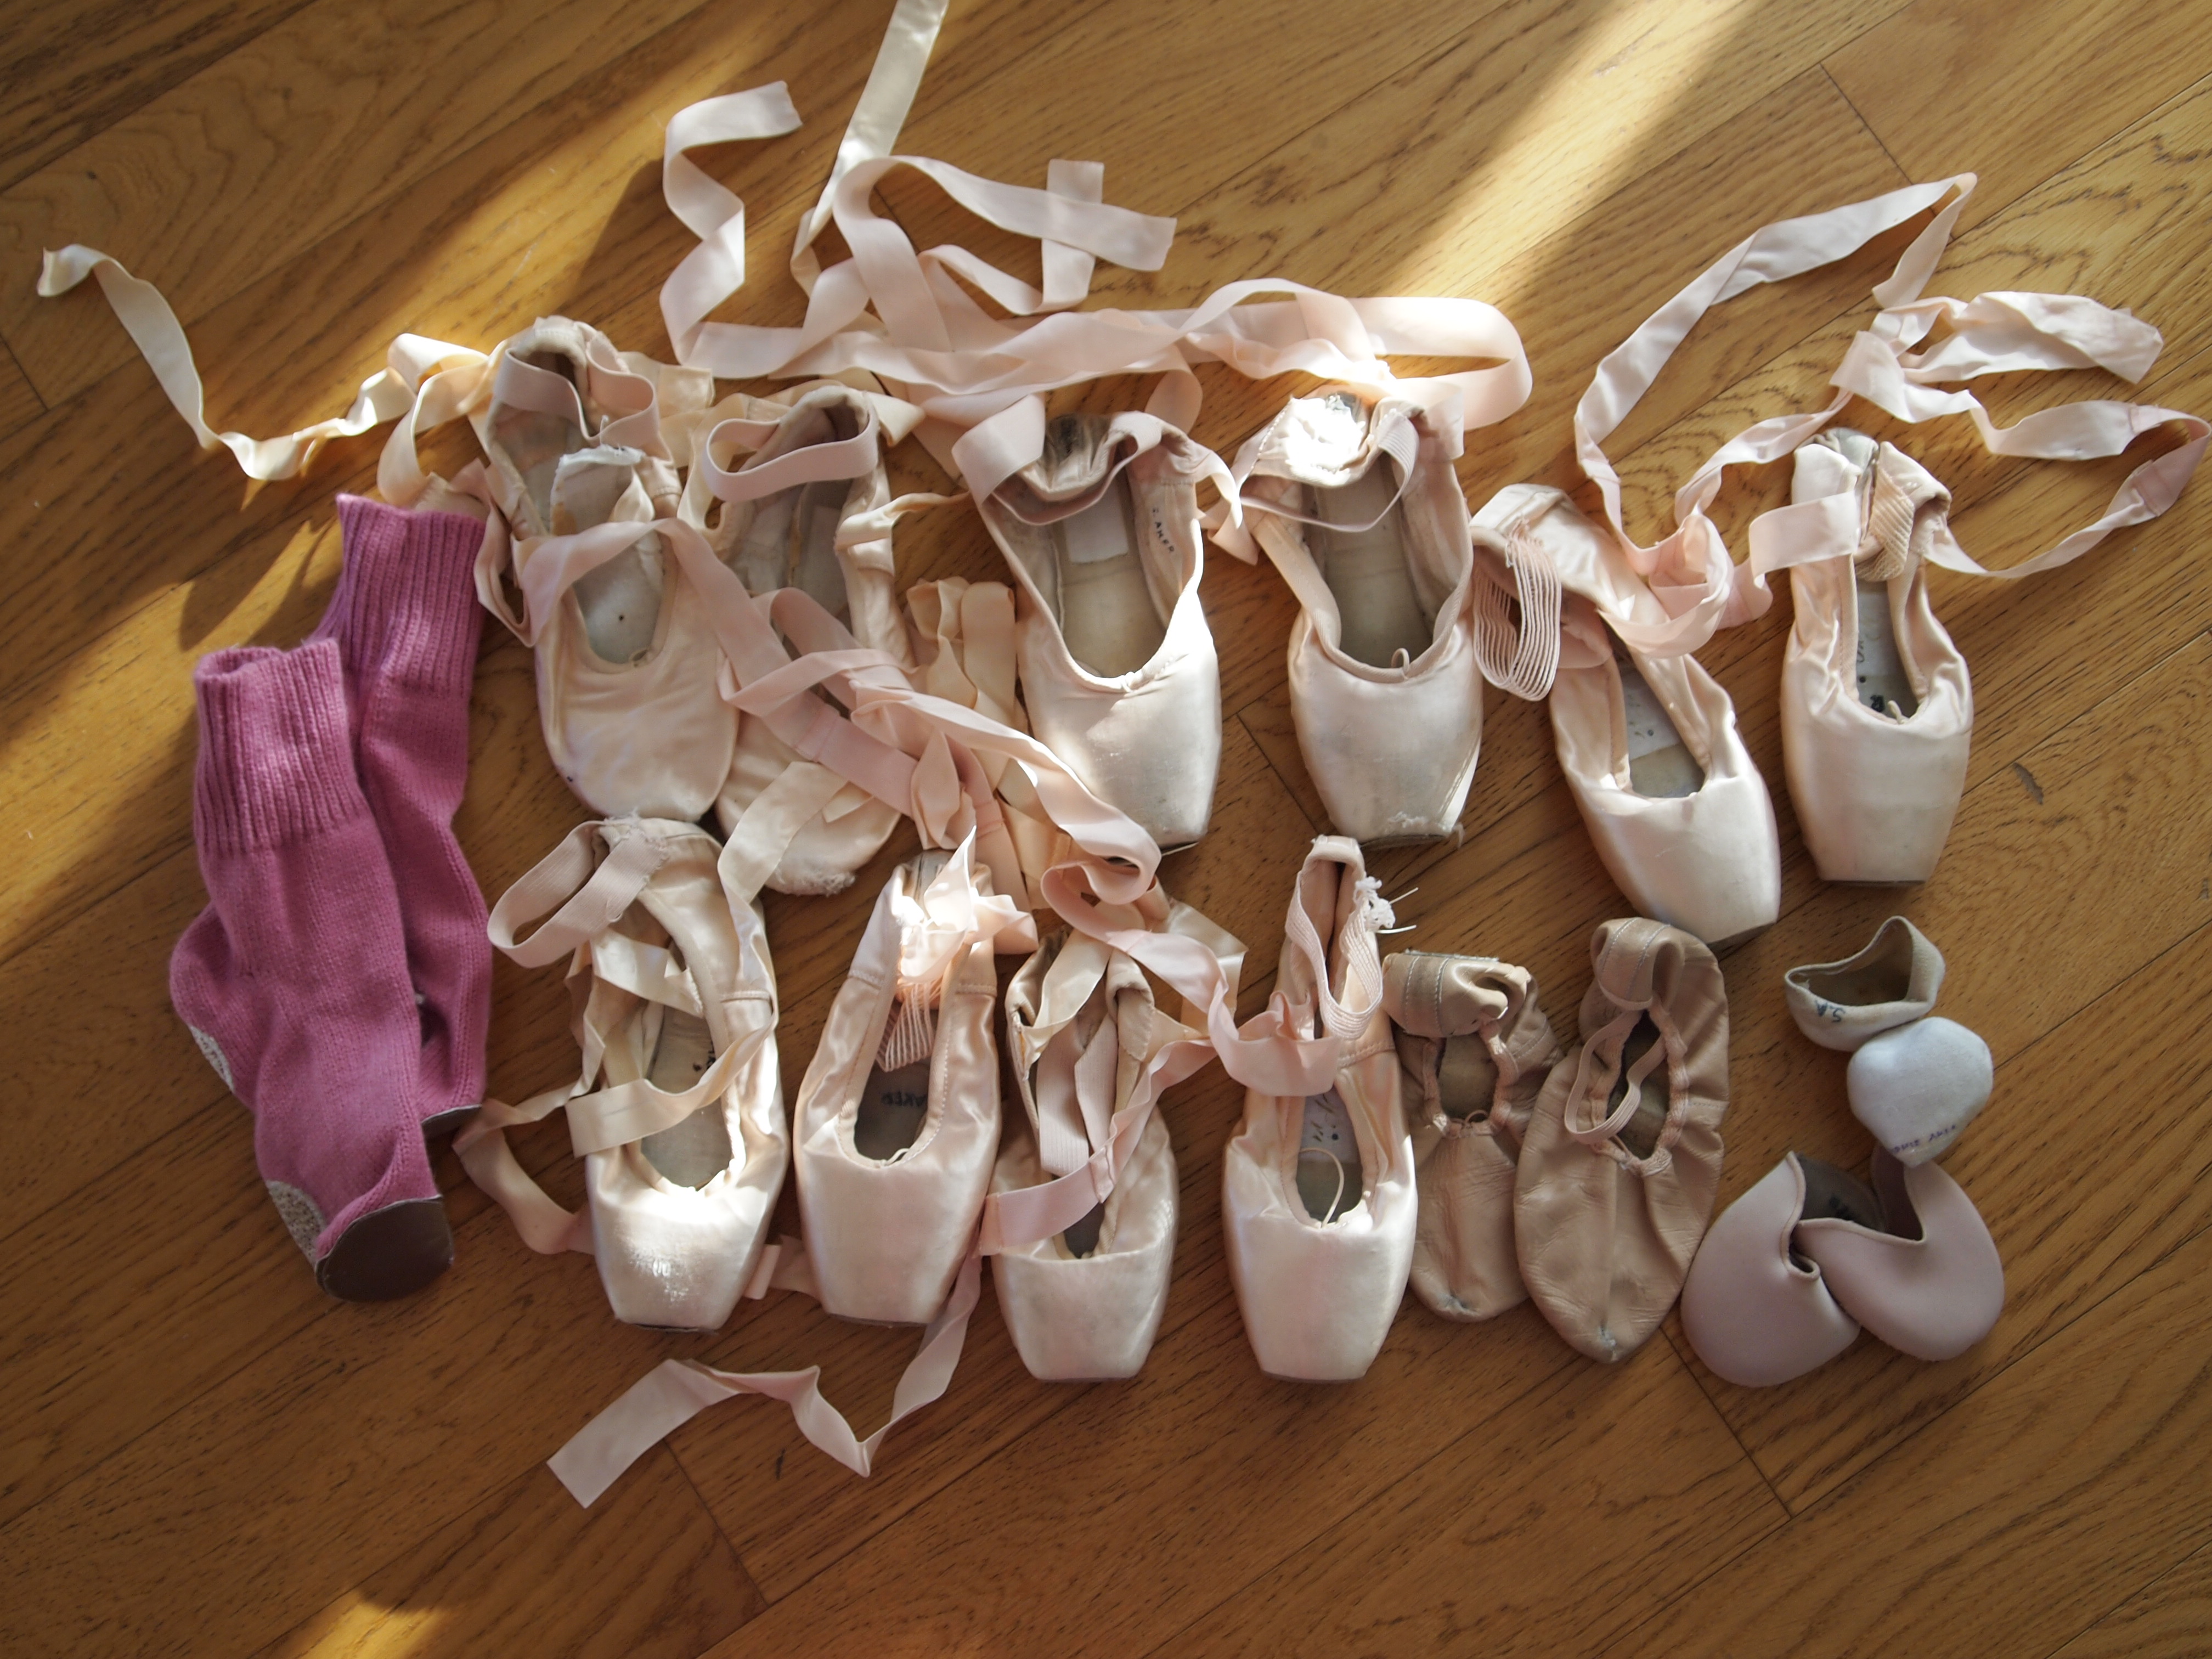 pointe ballet shoes for beginners